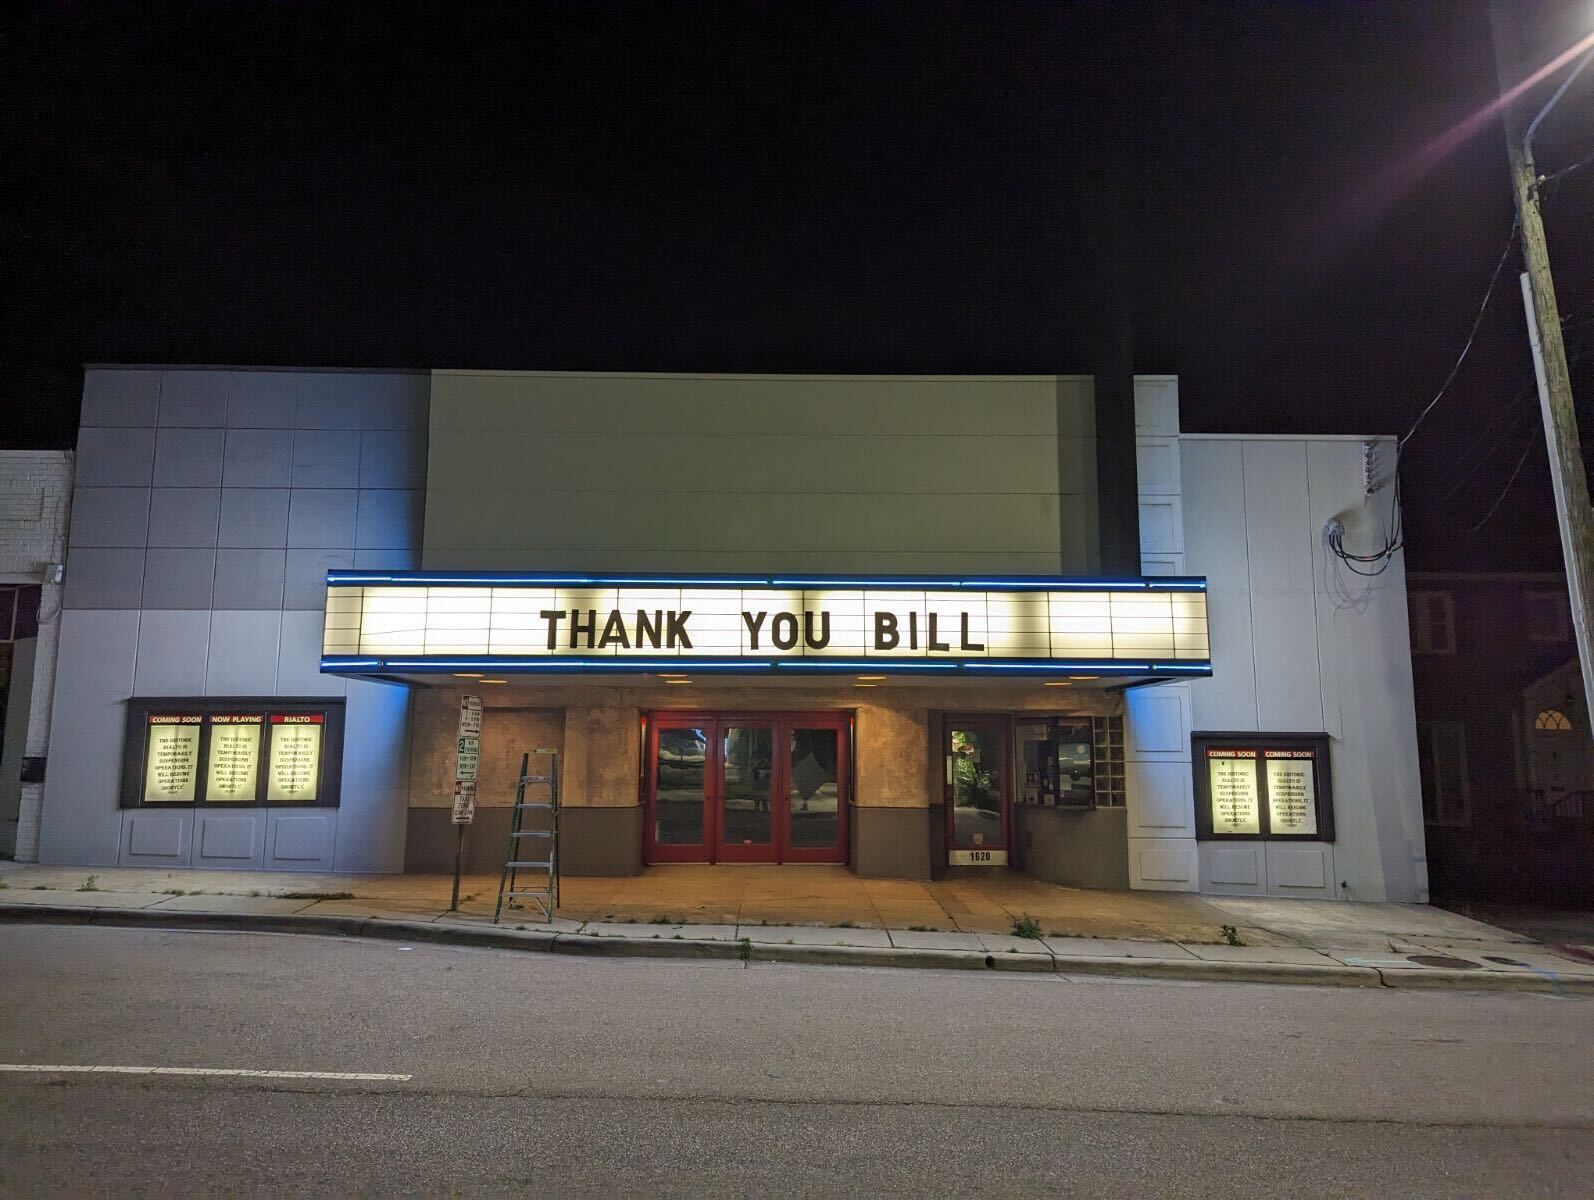 The Rialto’s marquee reads "Thank you Bill"